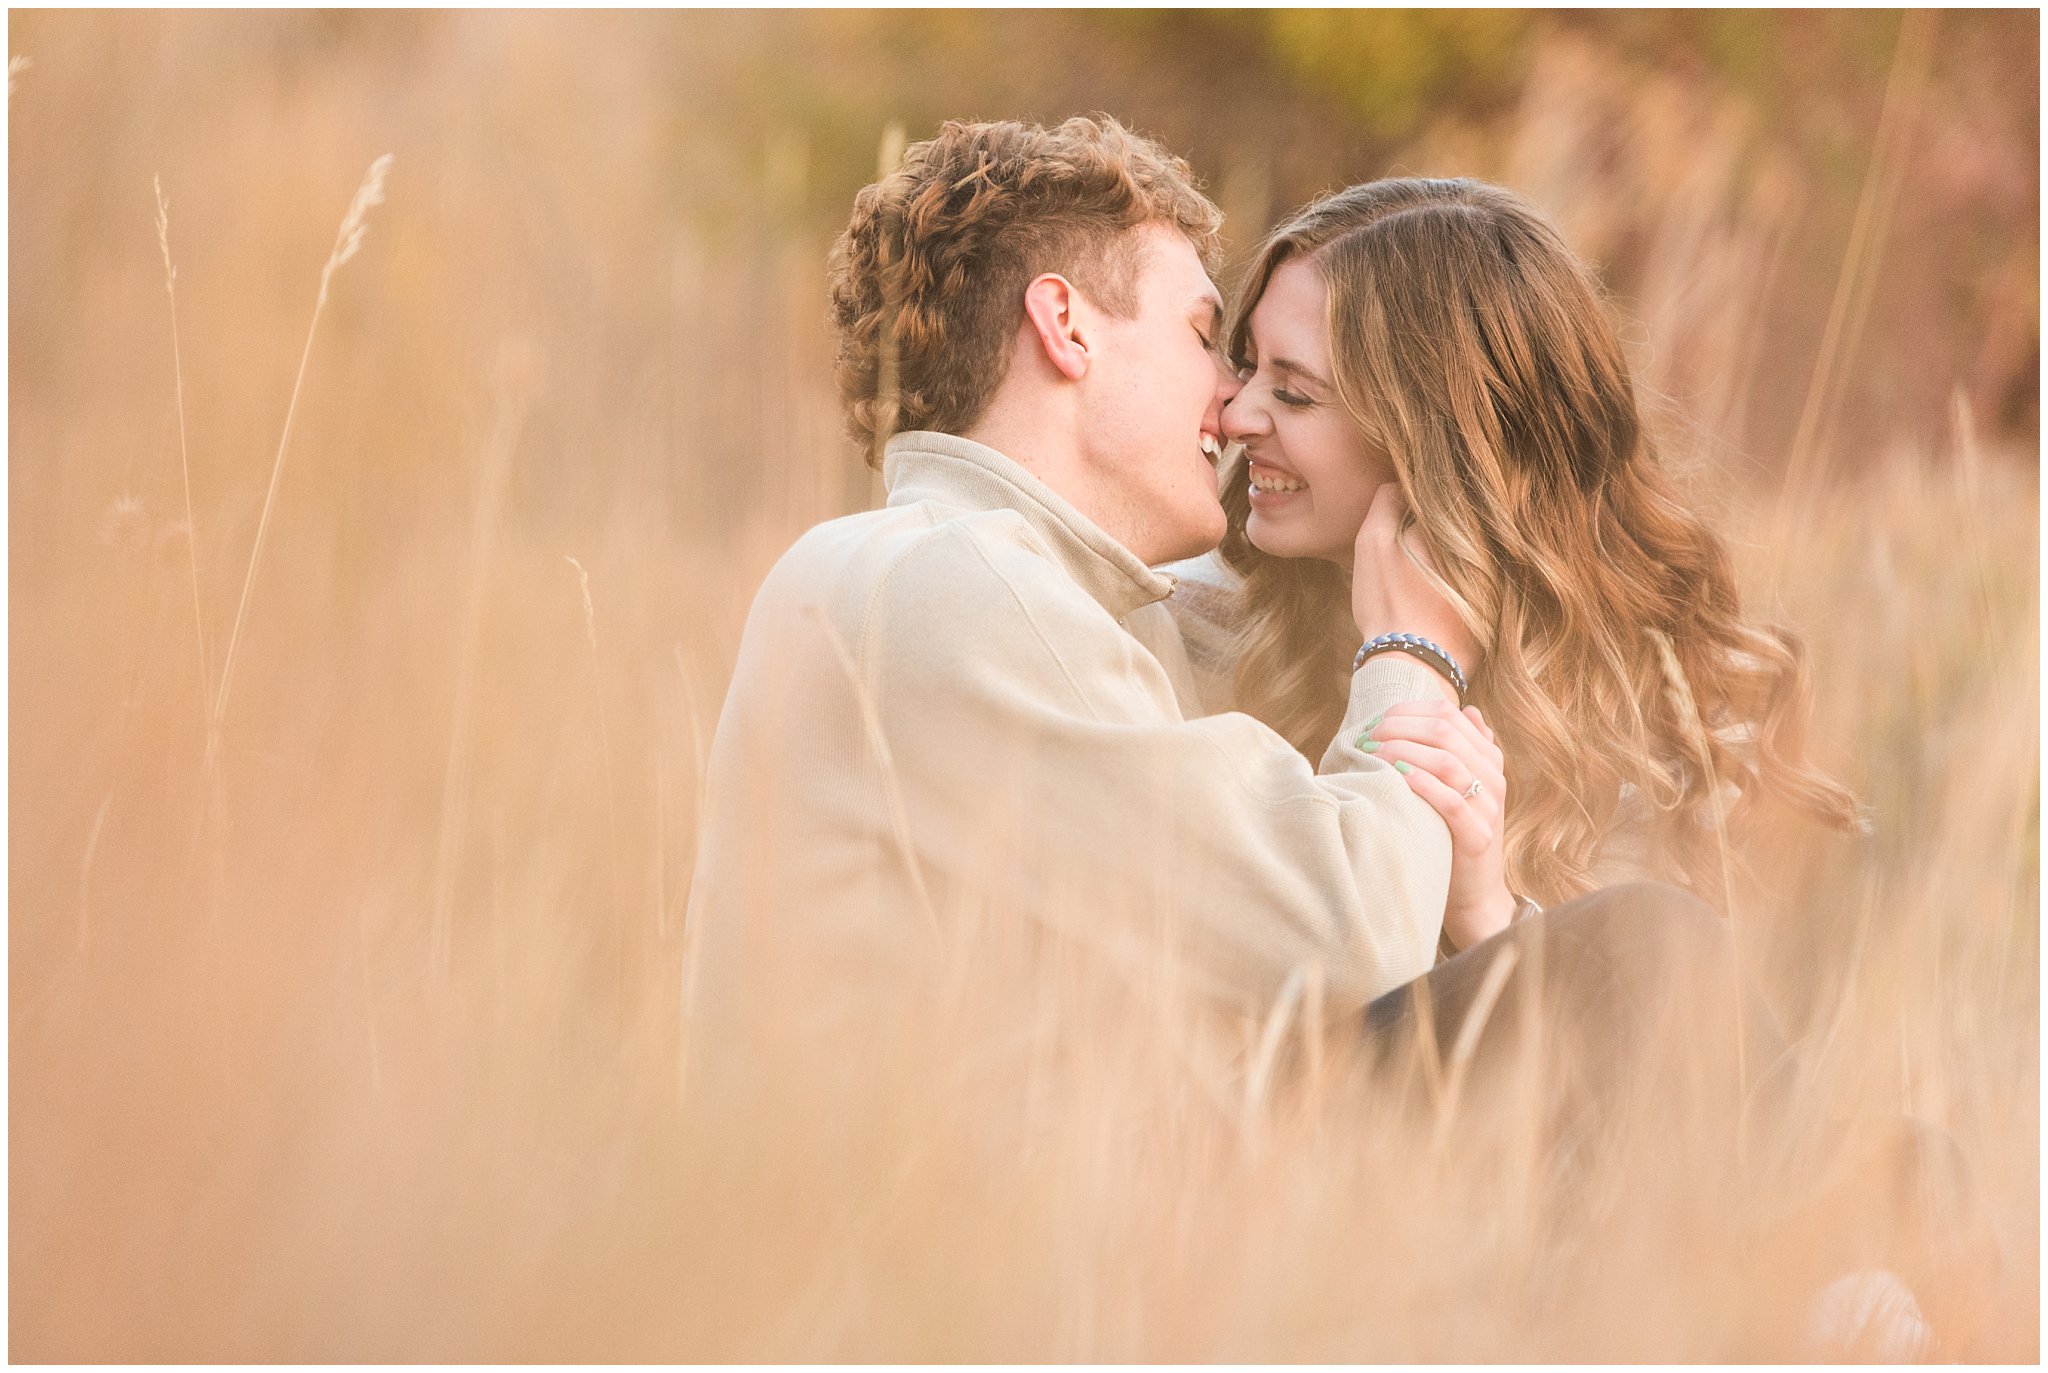 Candid photos of couple in casual cream colored fall sweaters | Utah Fall Engagement Session in a Golden Field | Jessie and Dallin Photography